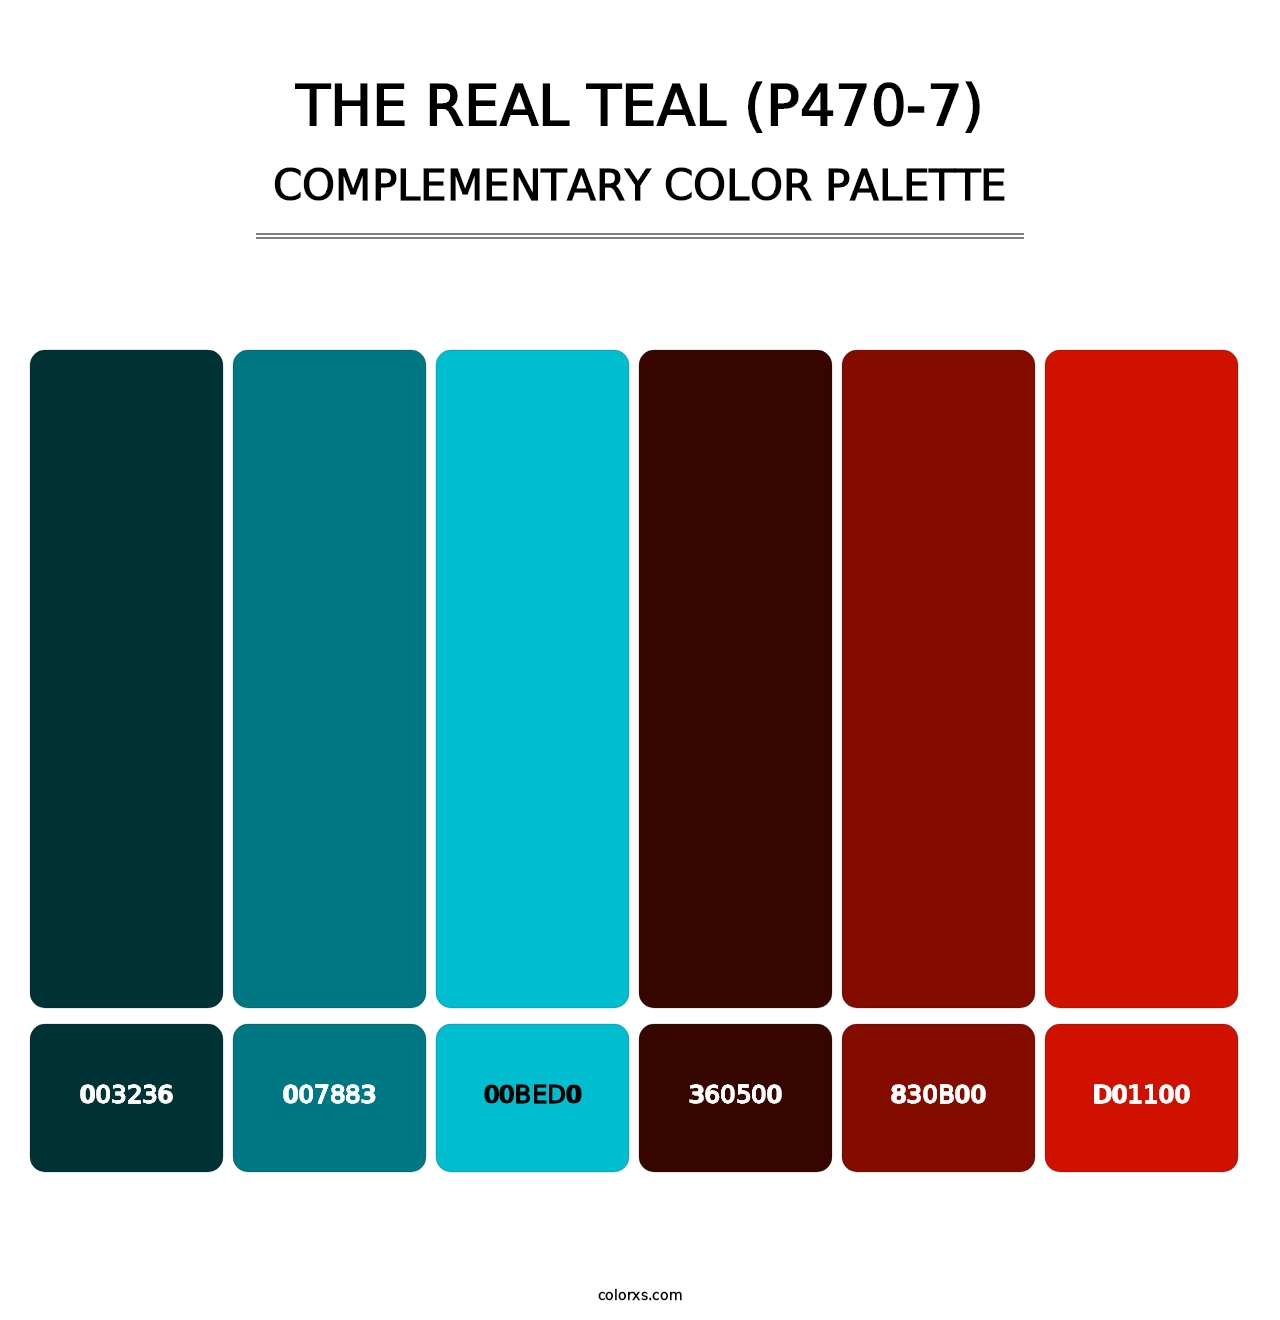 The Real Teal (P470-7) - Complementary Color Palette